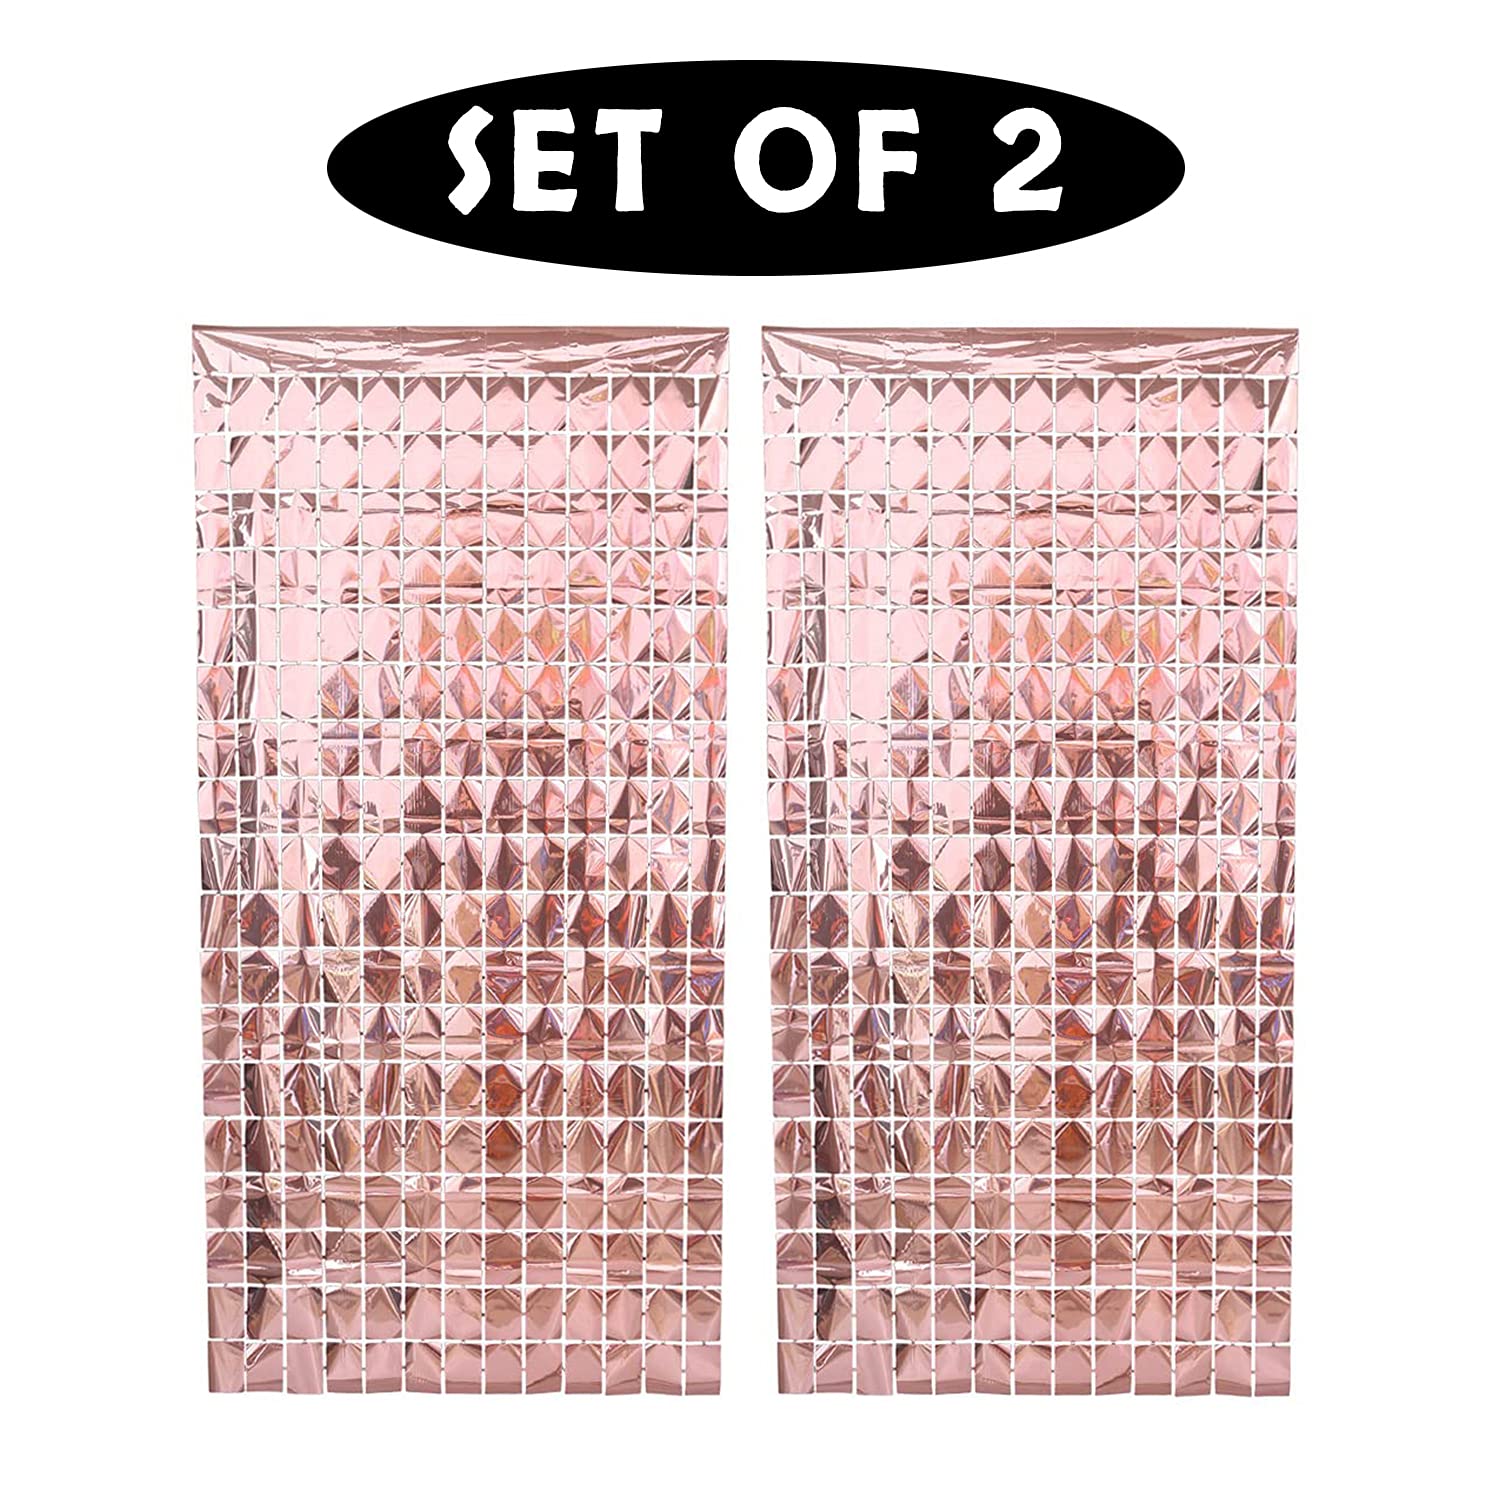 Rose Gold Foil Sequin Curtains For Birthday Decoration Foil Curtain, Anniversary Decoration Items For Home, Bachelorette, Bridal Shower (Set of 2)